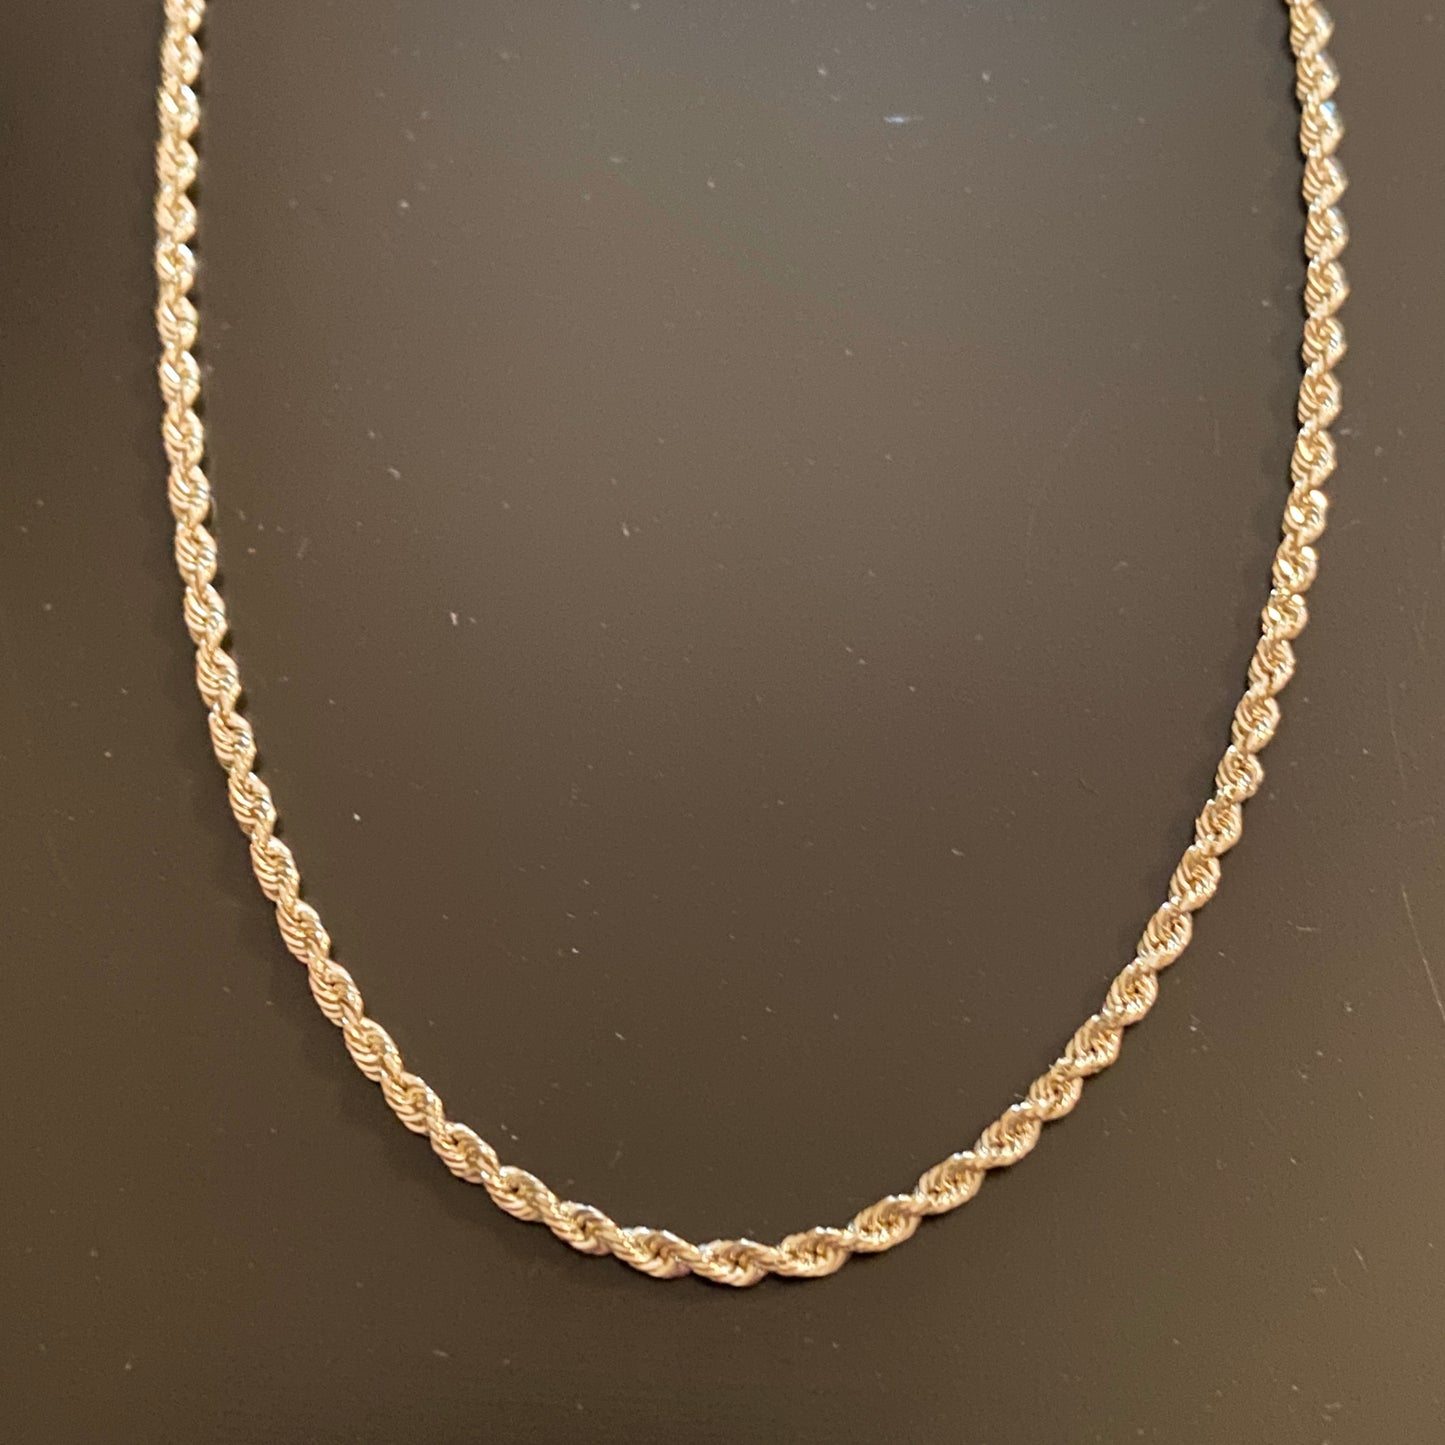 Solid Real 10k Gold Rope Chain 20in 3mm